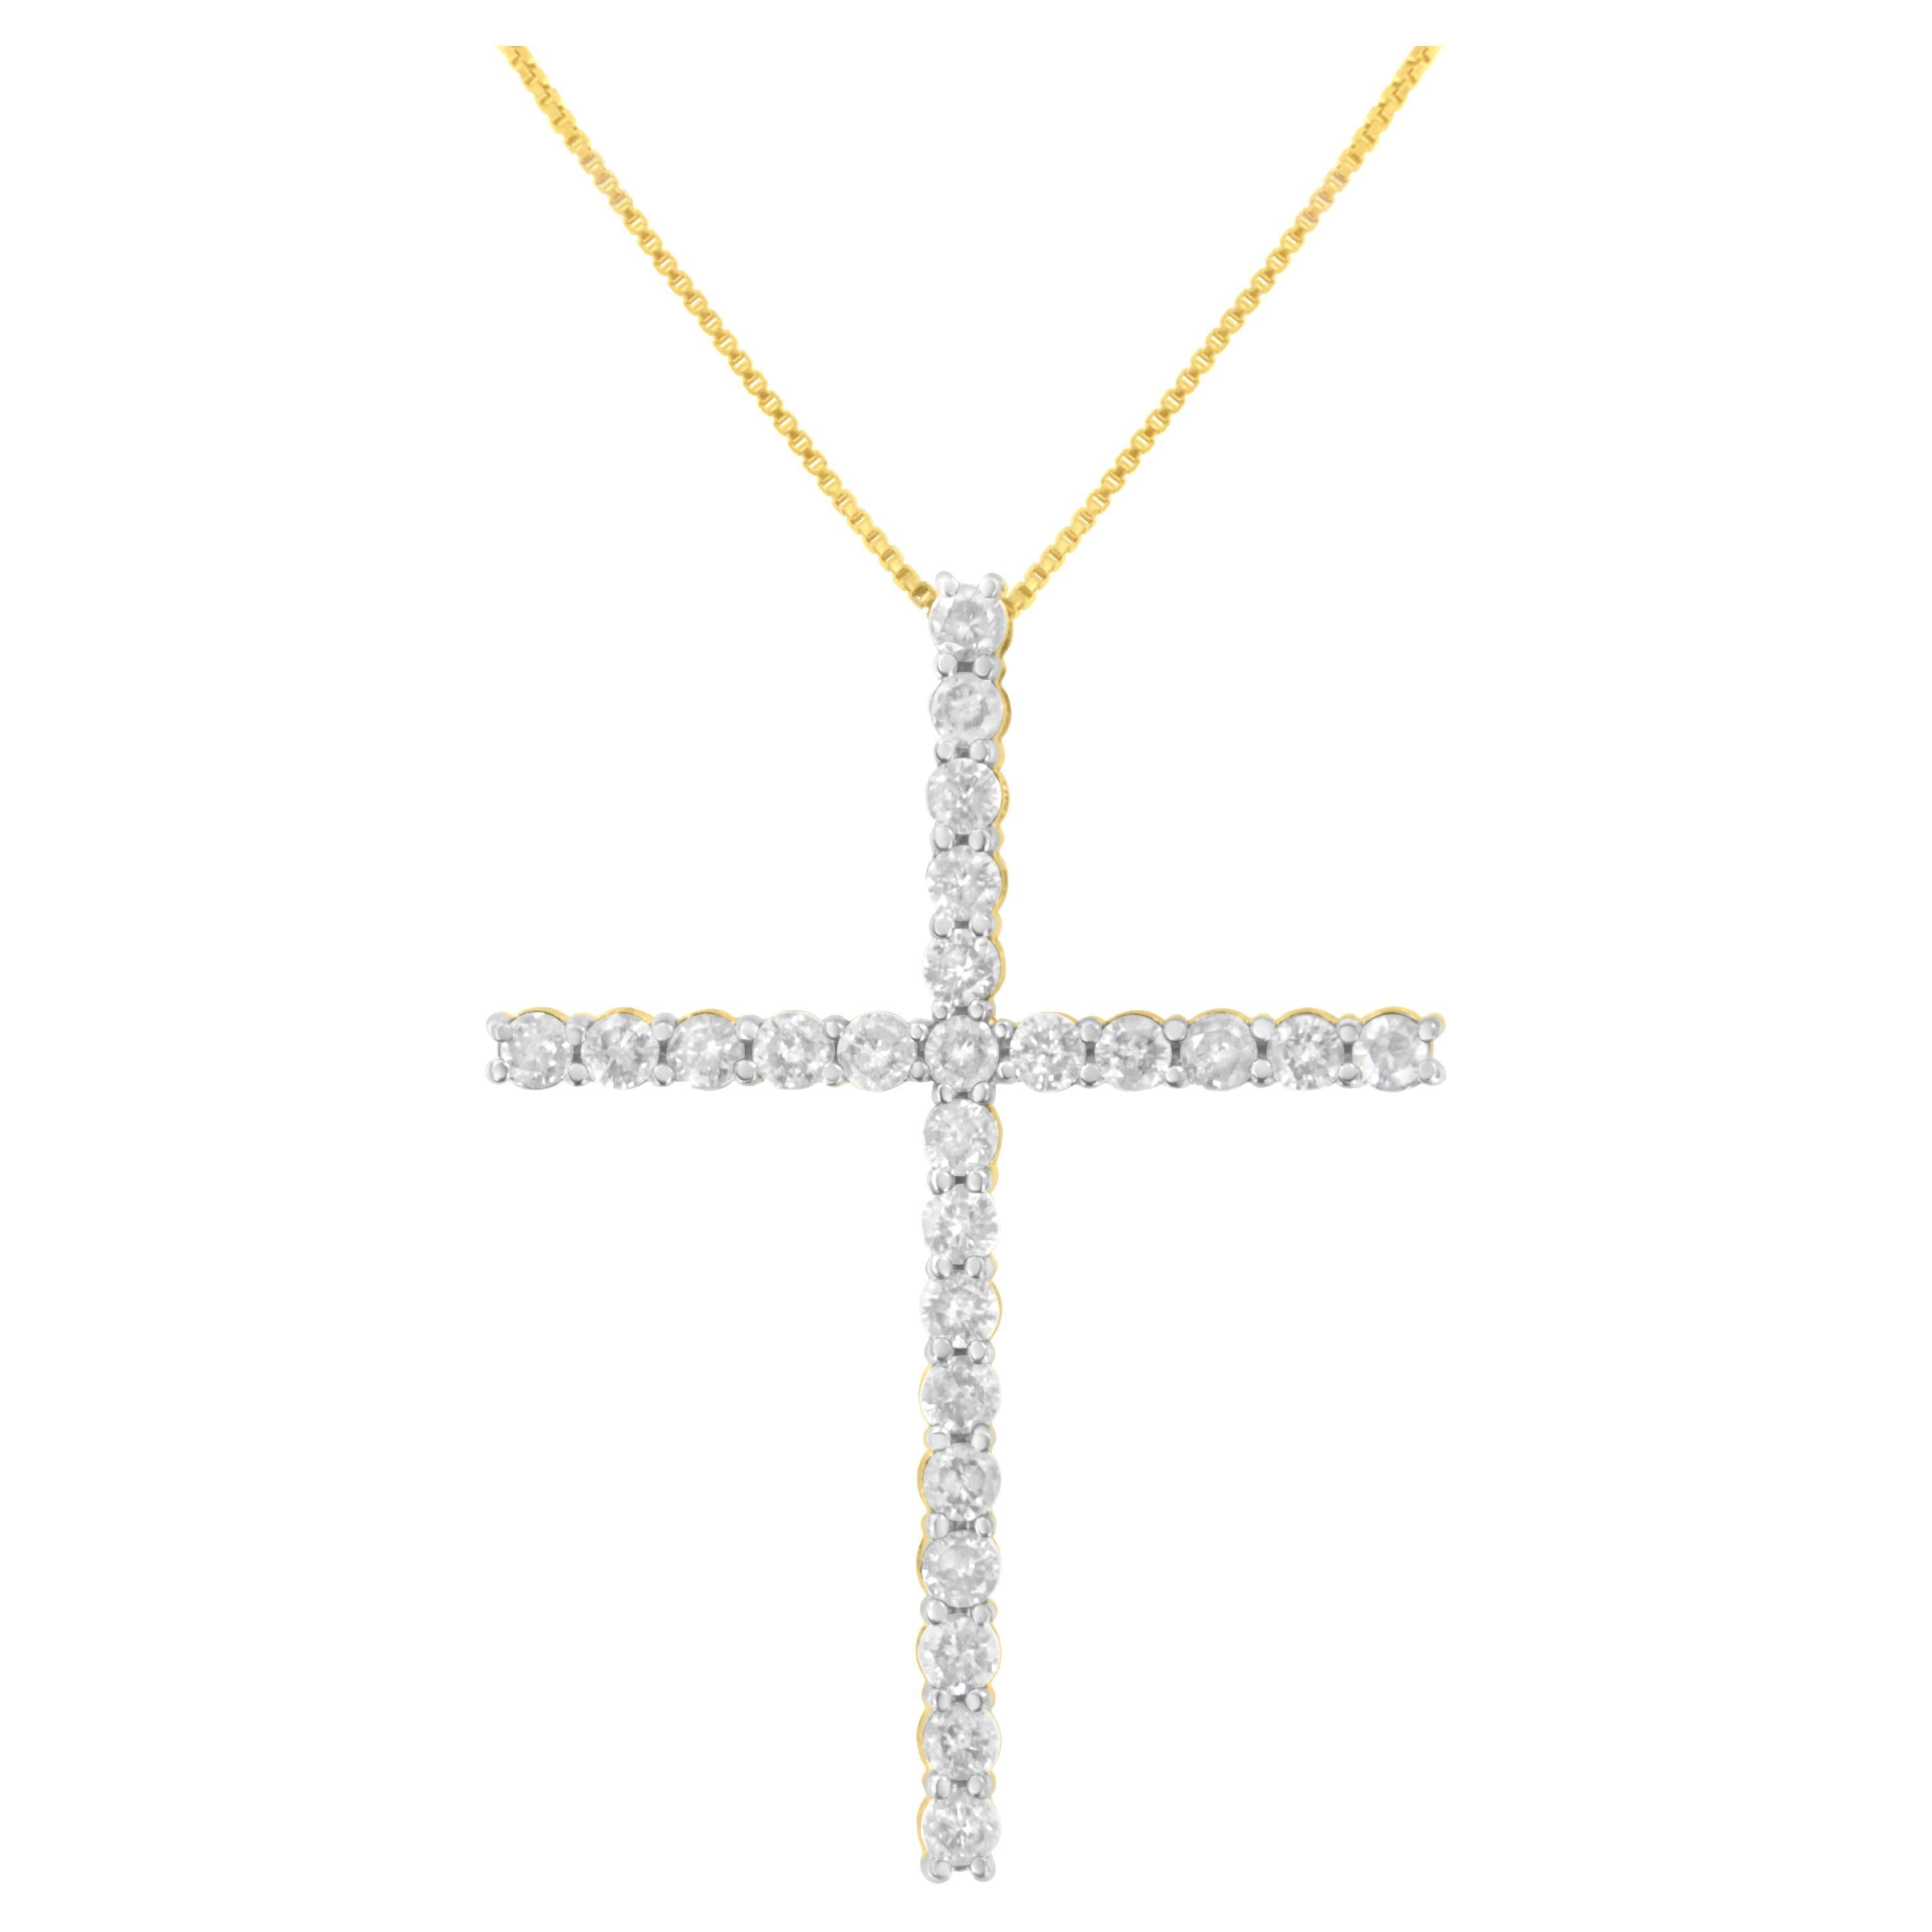 Yellow Gold Plated Sterling Silver 2 1/2 Carat Diamond Cross Pendant Necklace